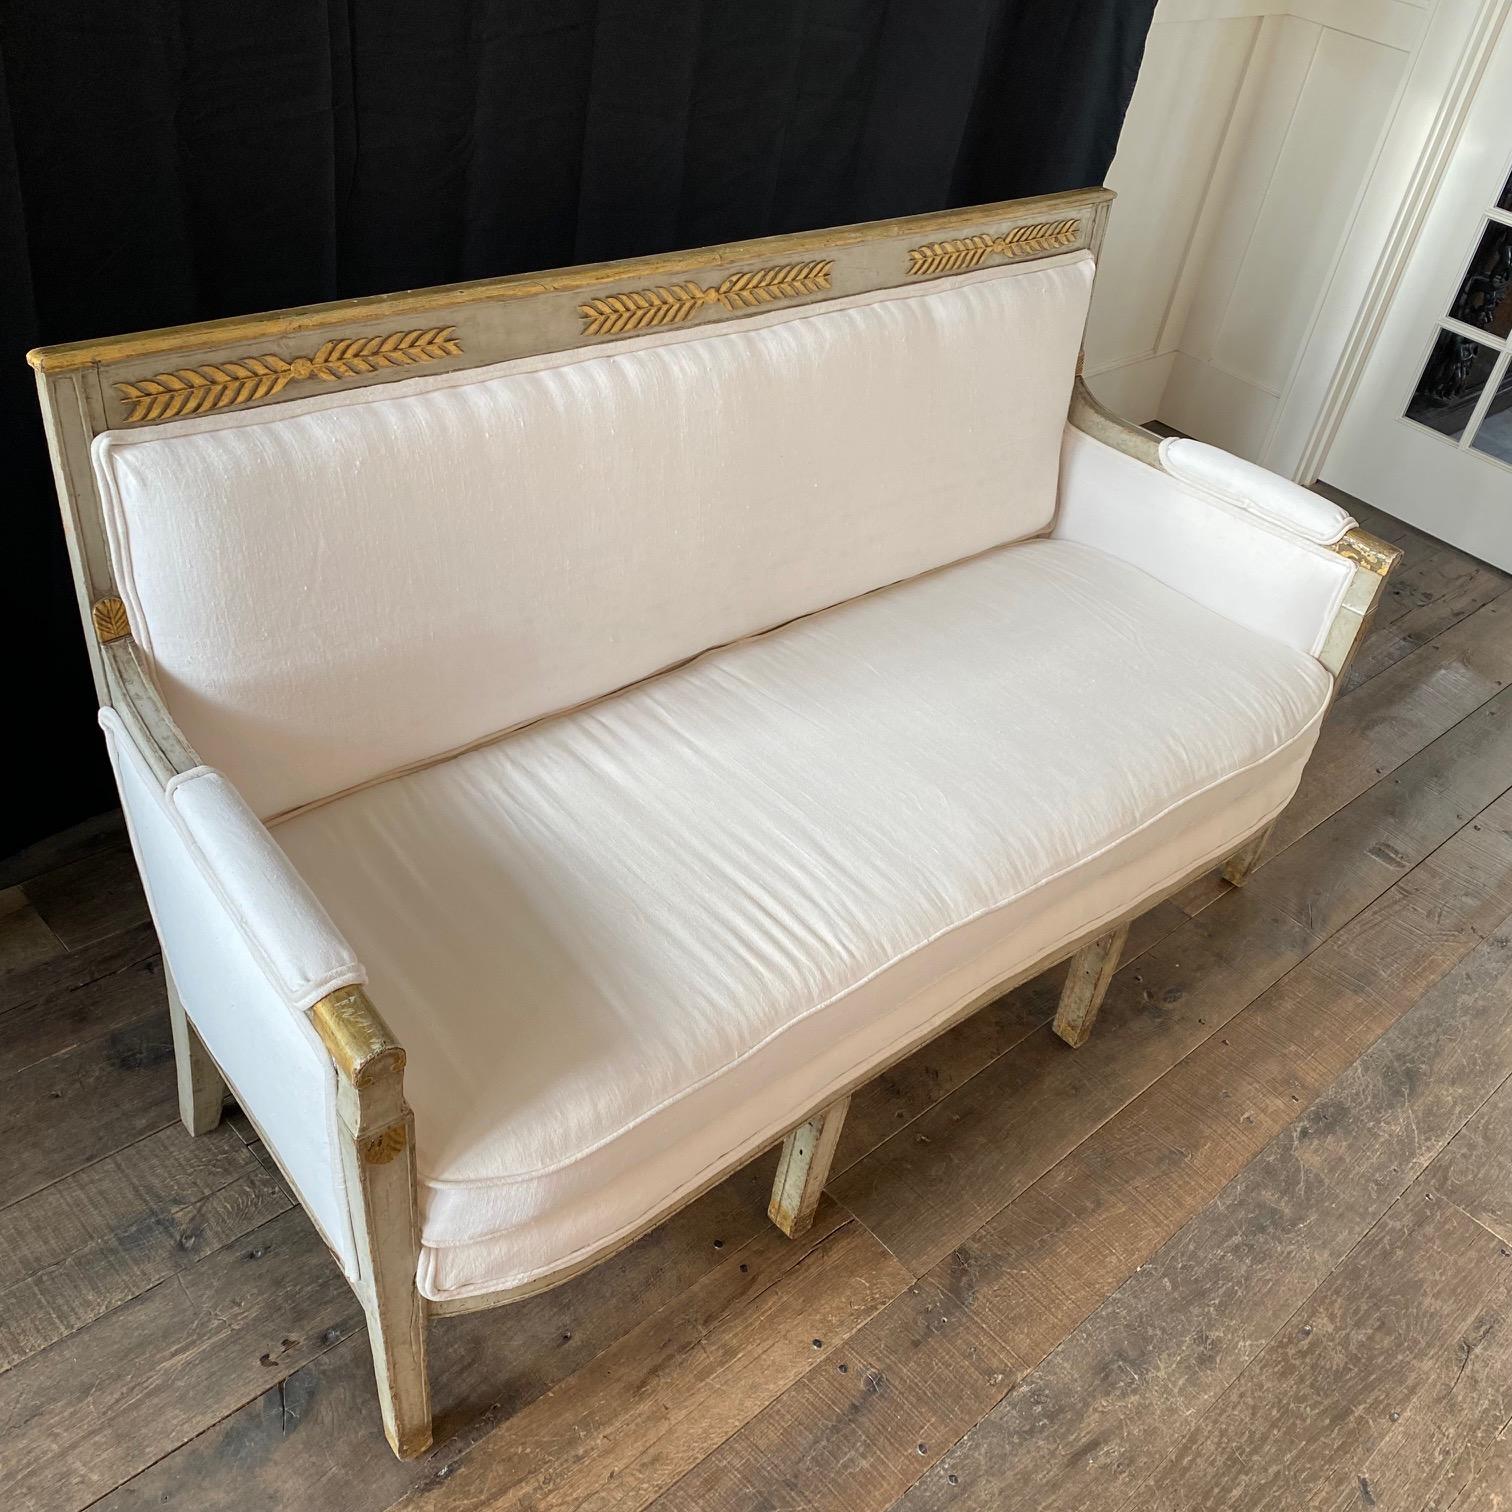 Early 19th Century Italian Neoclassical Painted and Parcel Gilt Sofa or Canape For Sale 3